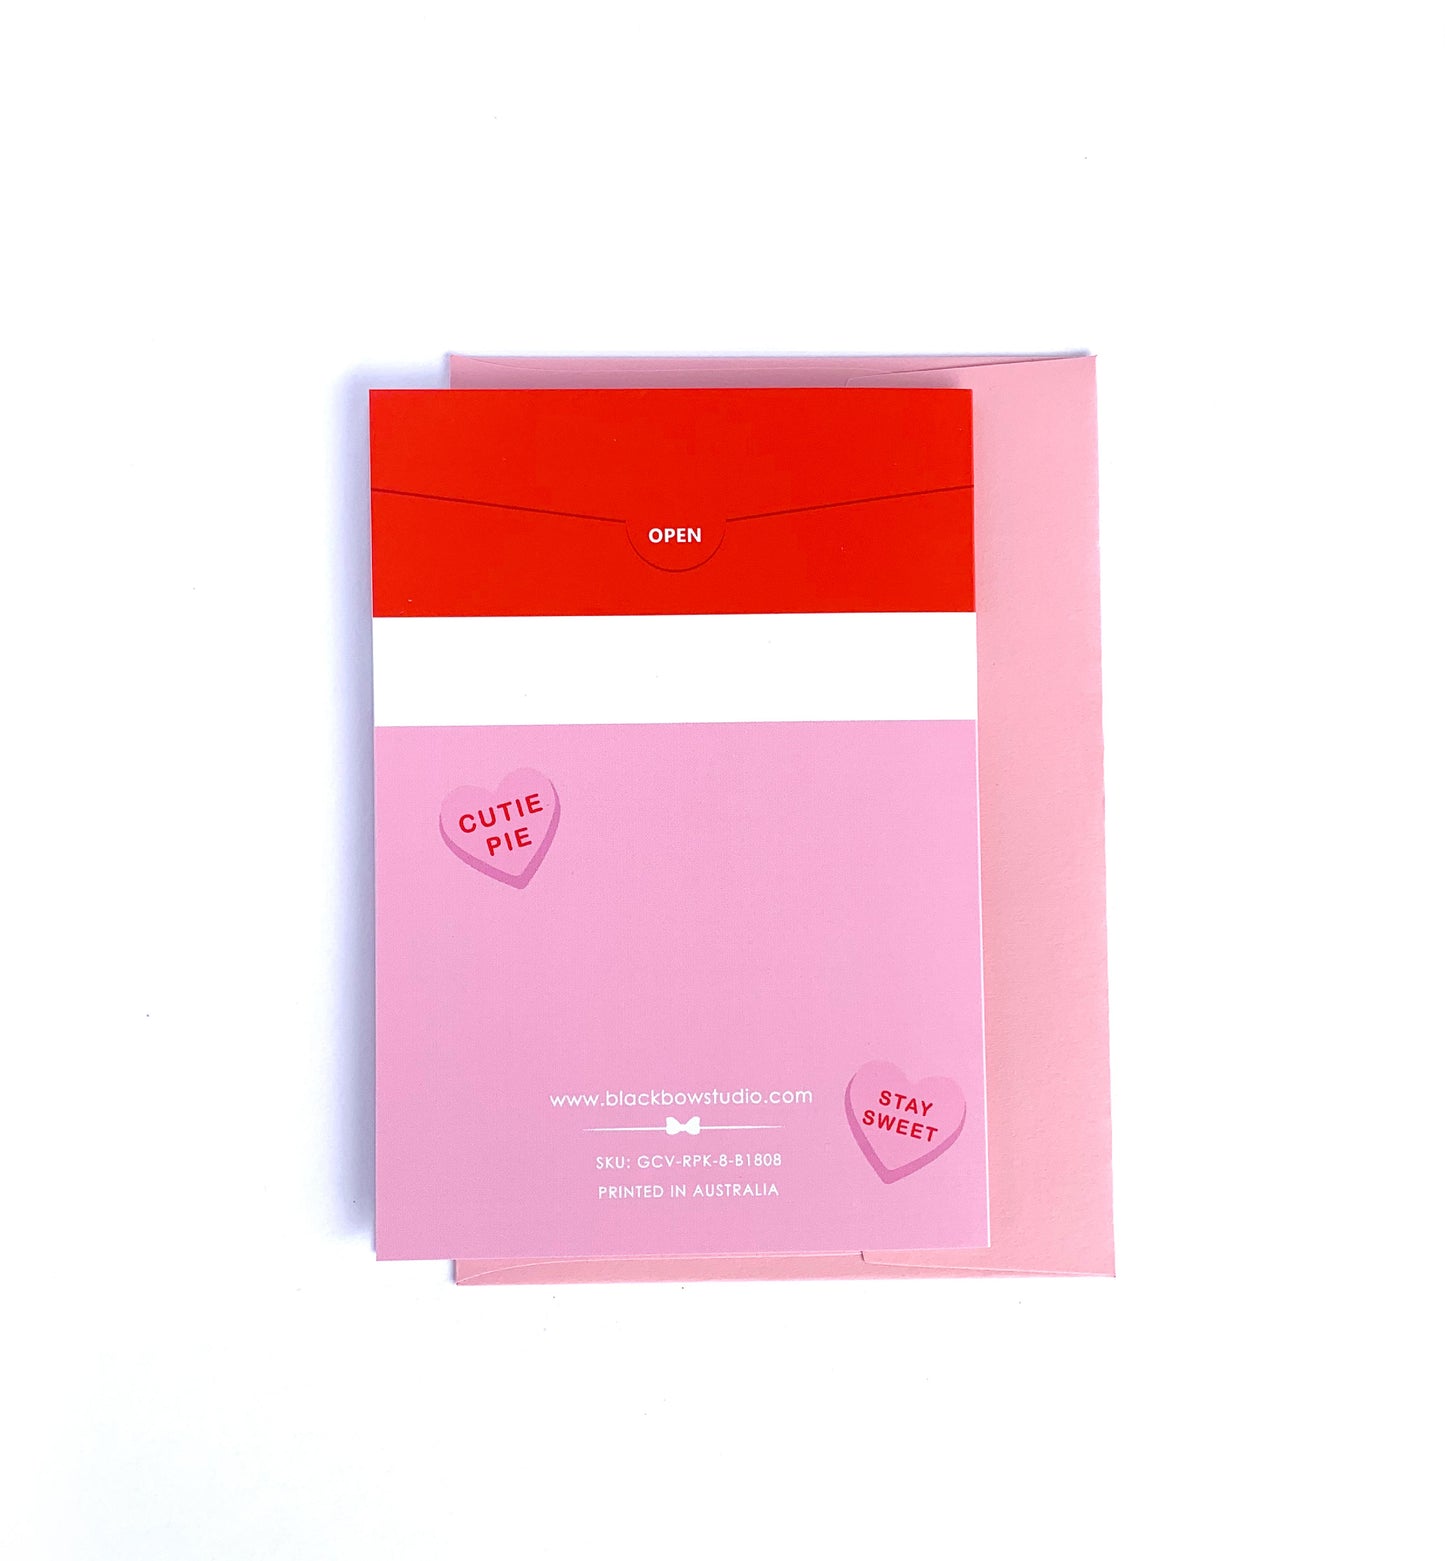 Convo Hearts Pink | Valentine's Day Greeting Card